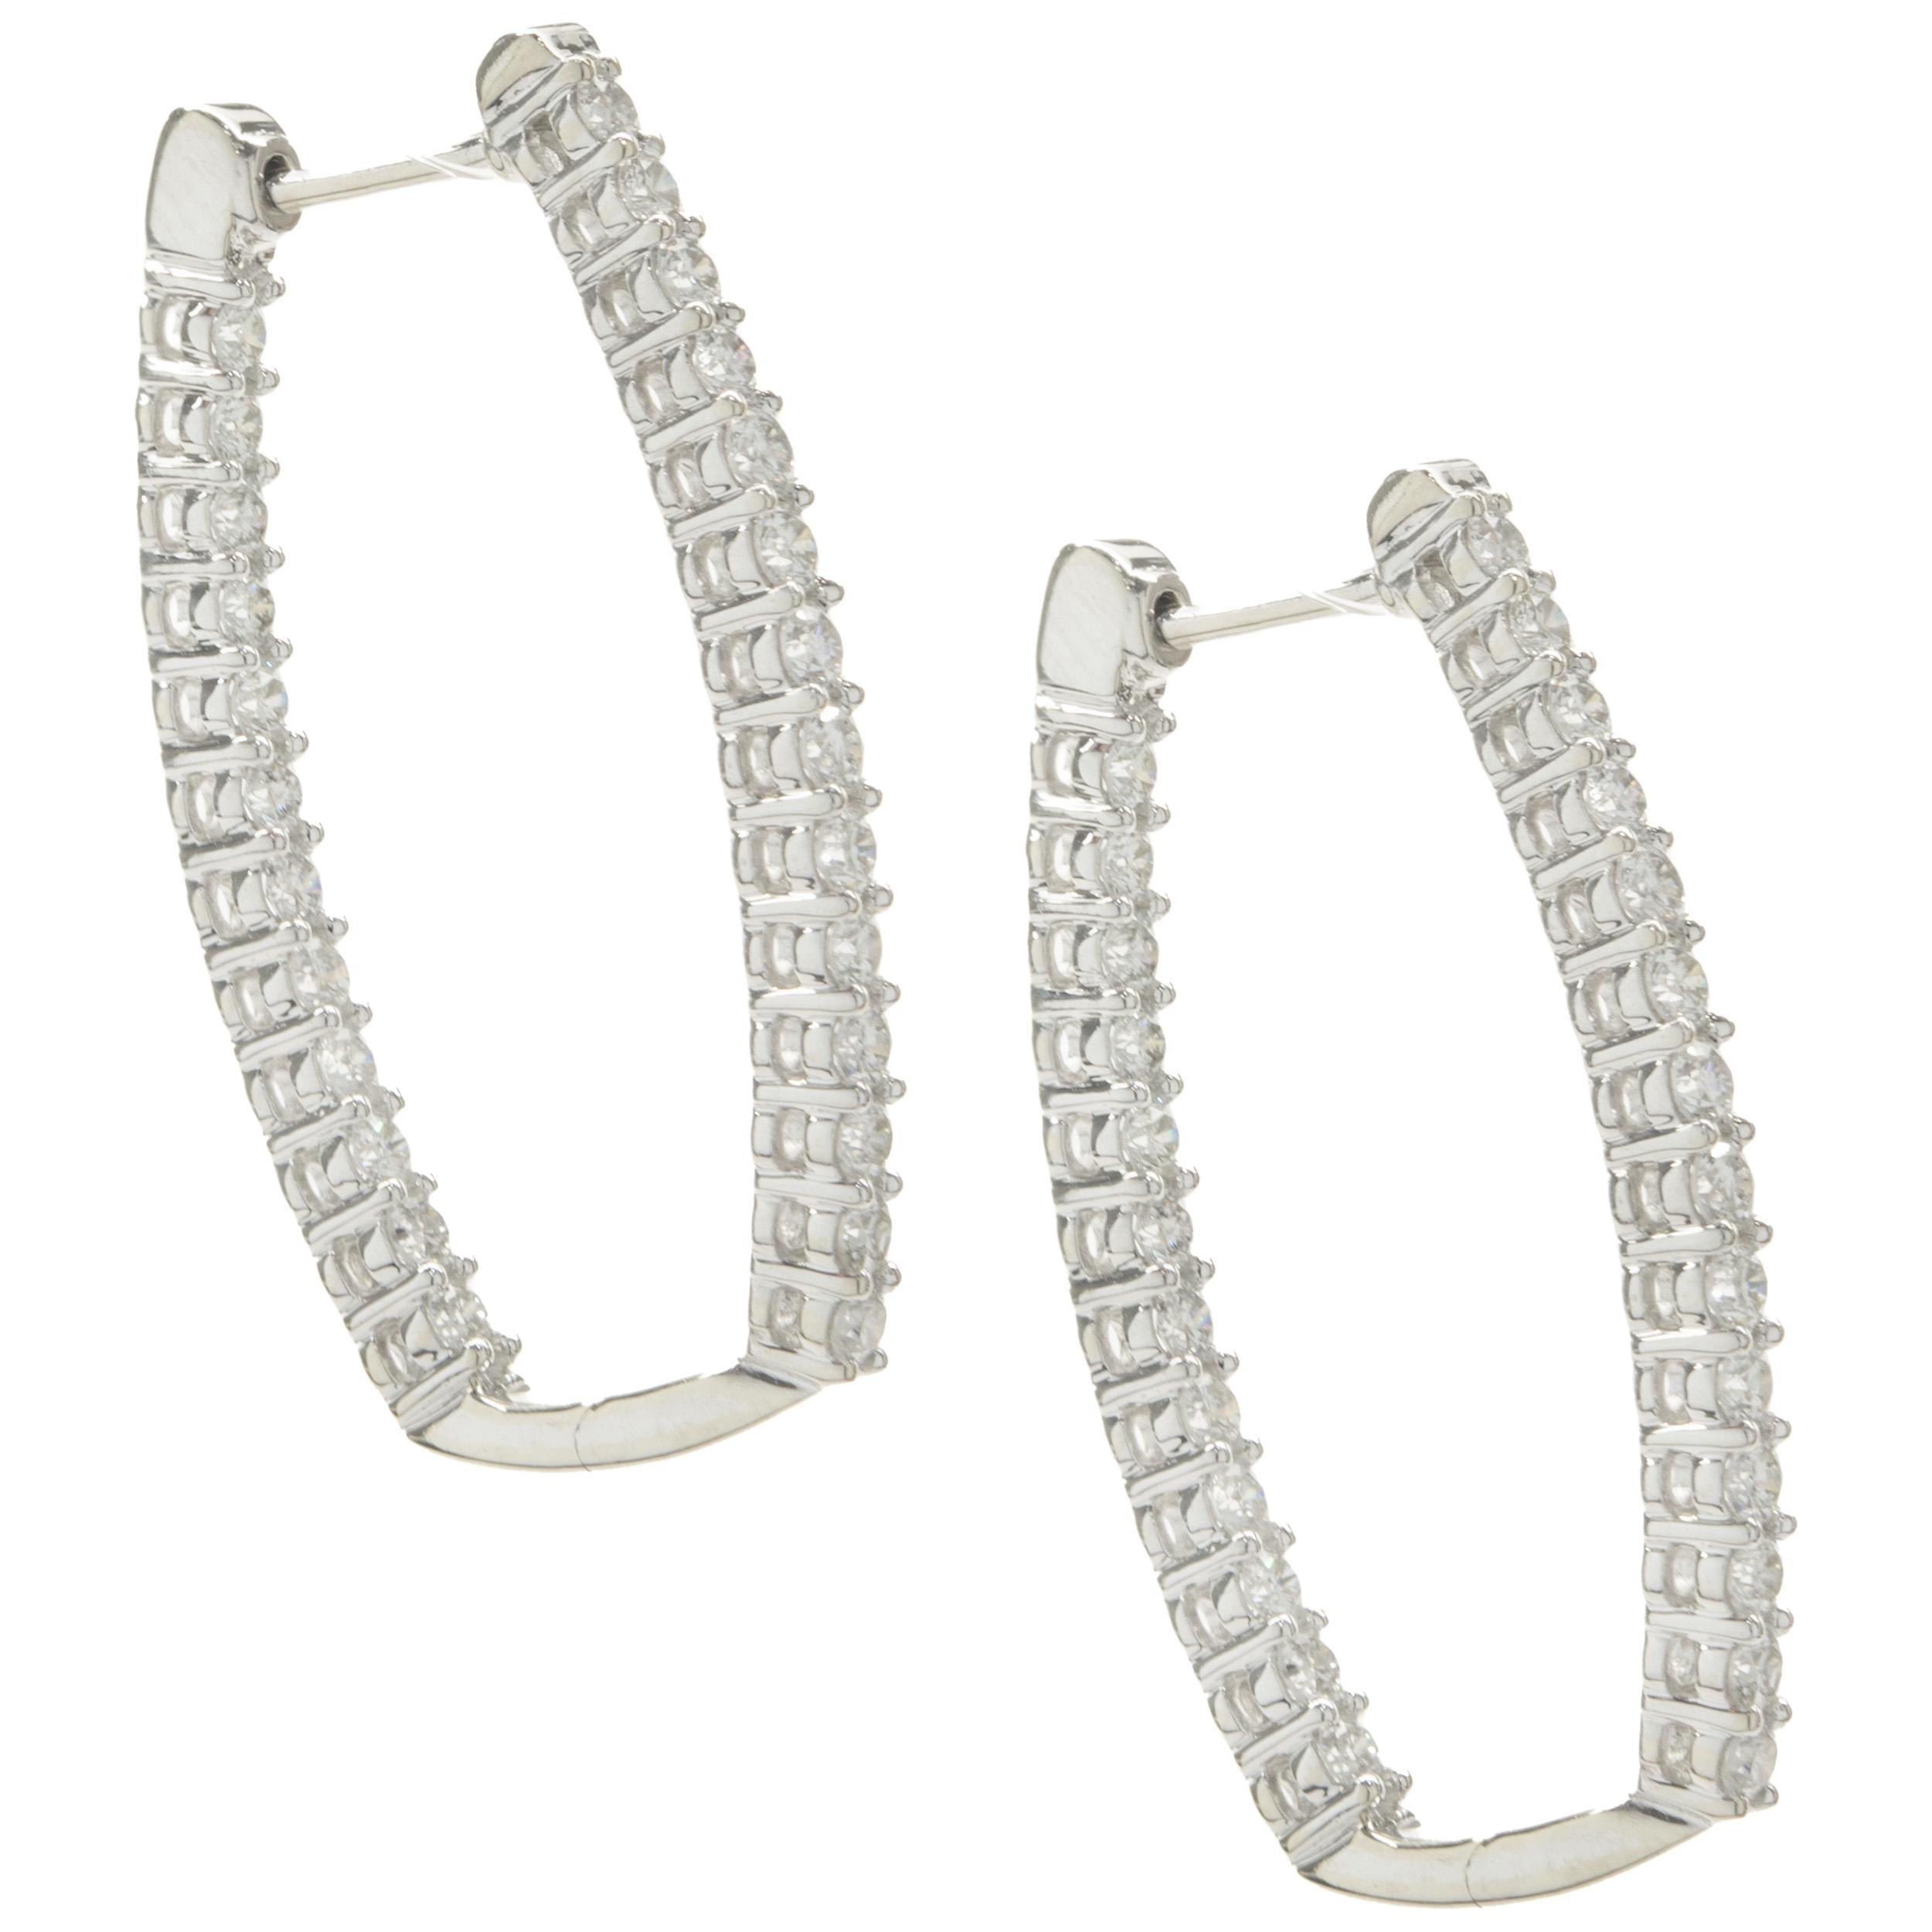 Designer: custom design
Material: 14K white gold
Diamonds: 52 round brilliant cut= 0.84cttw
Color: H
Clarity: SI1
Dimensions: earrings measure 34mm long
Weight: 7.07 grams